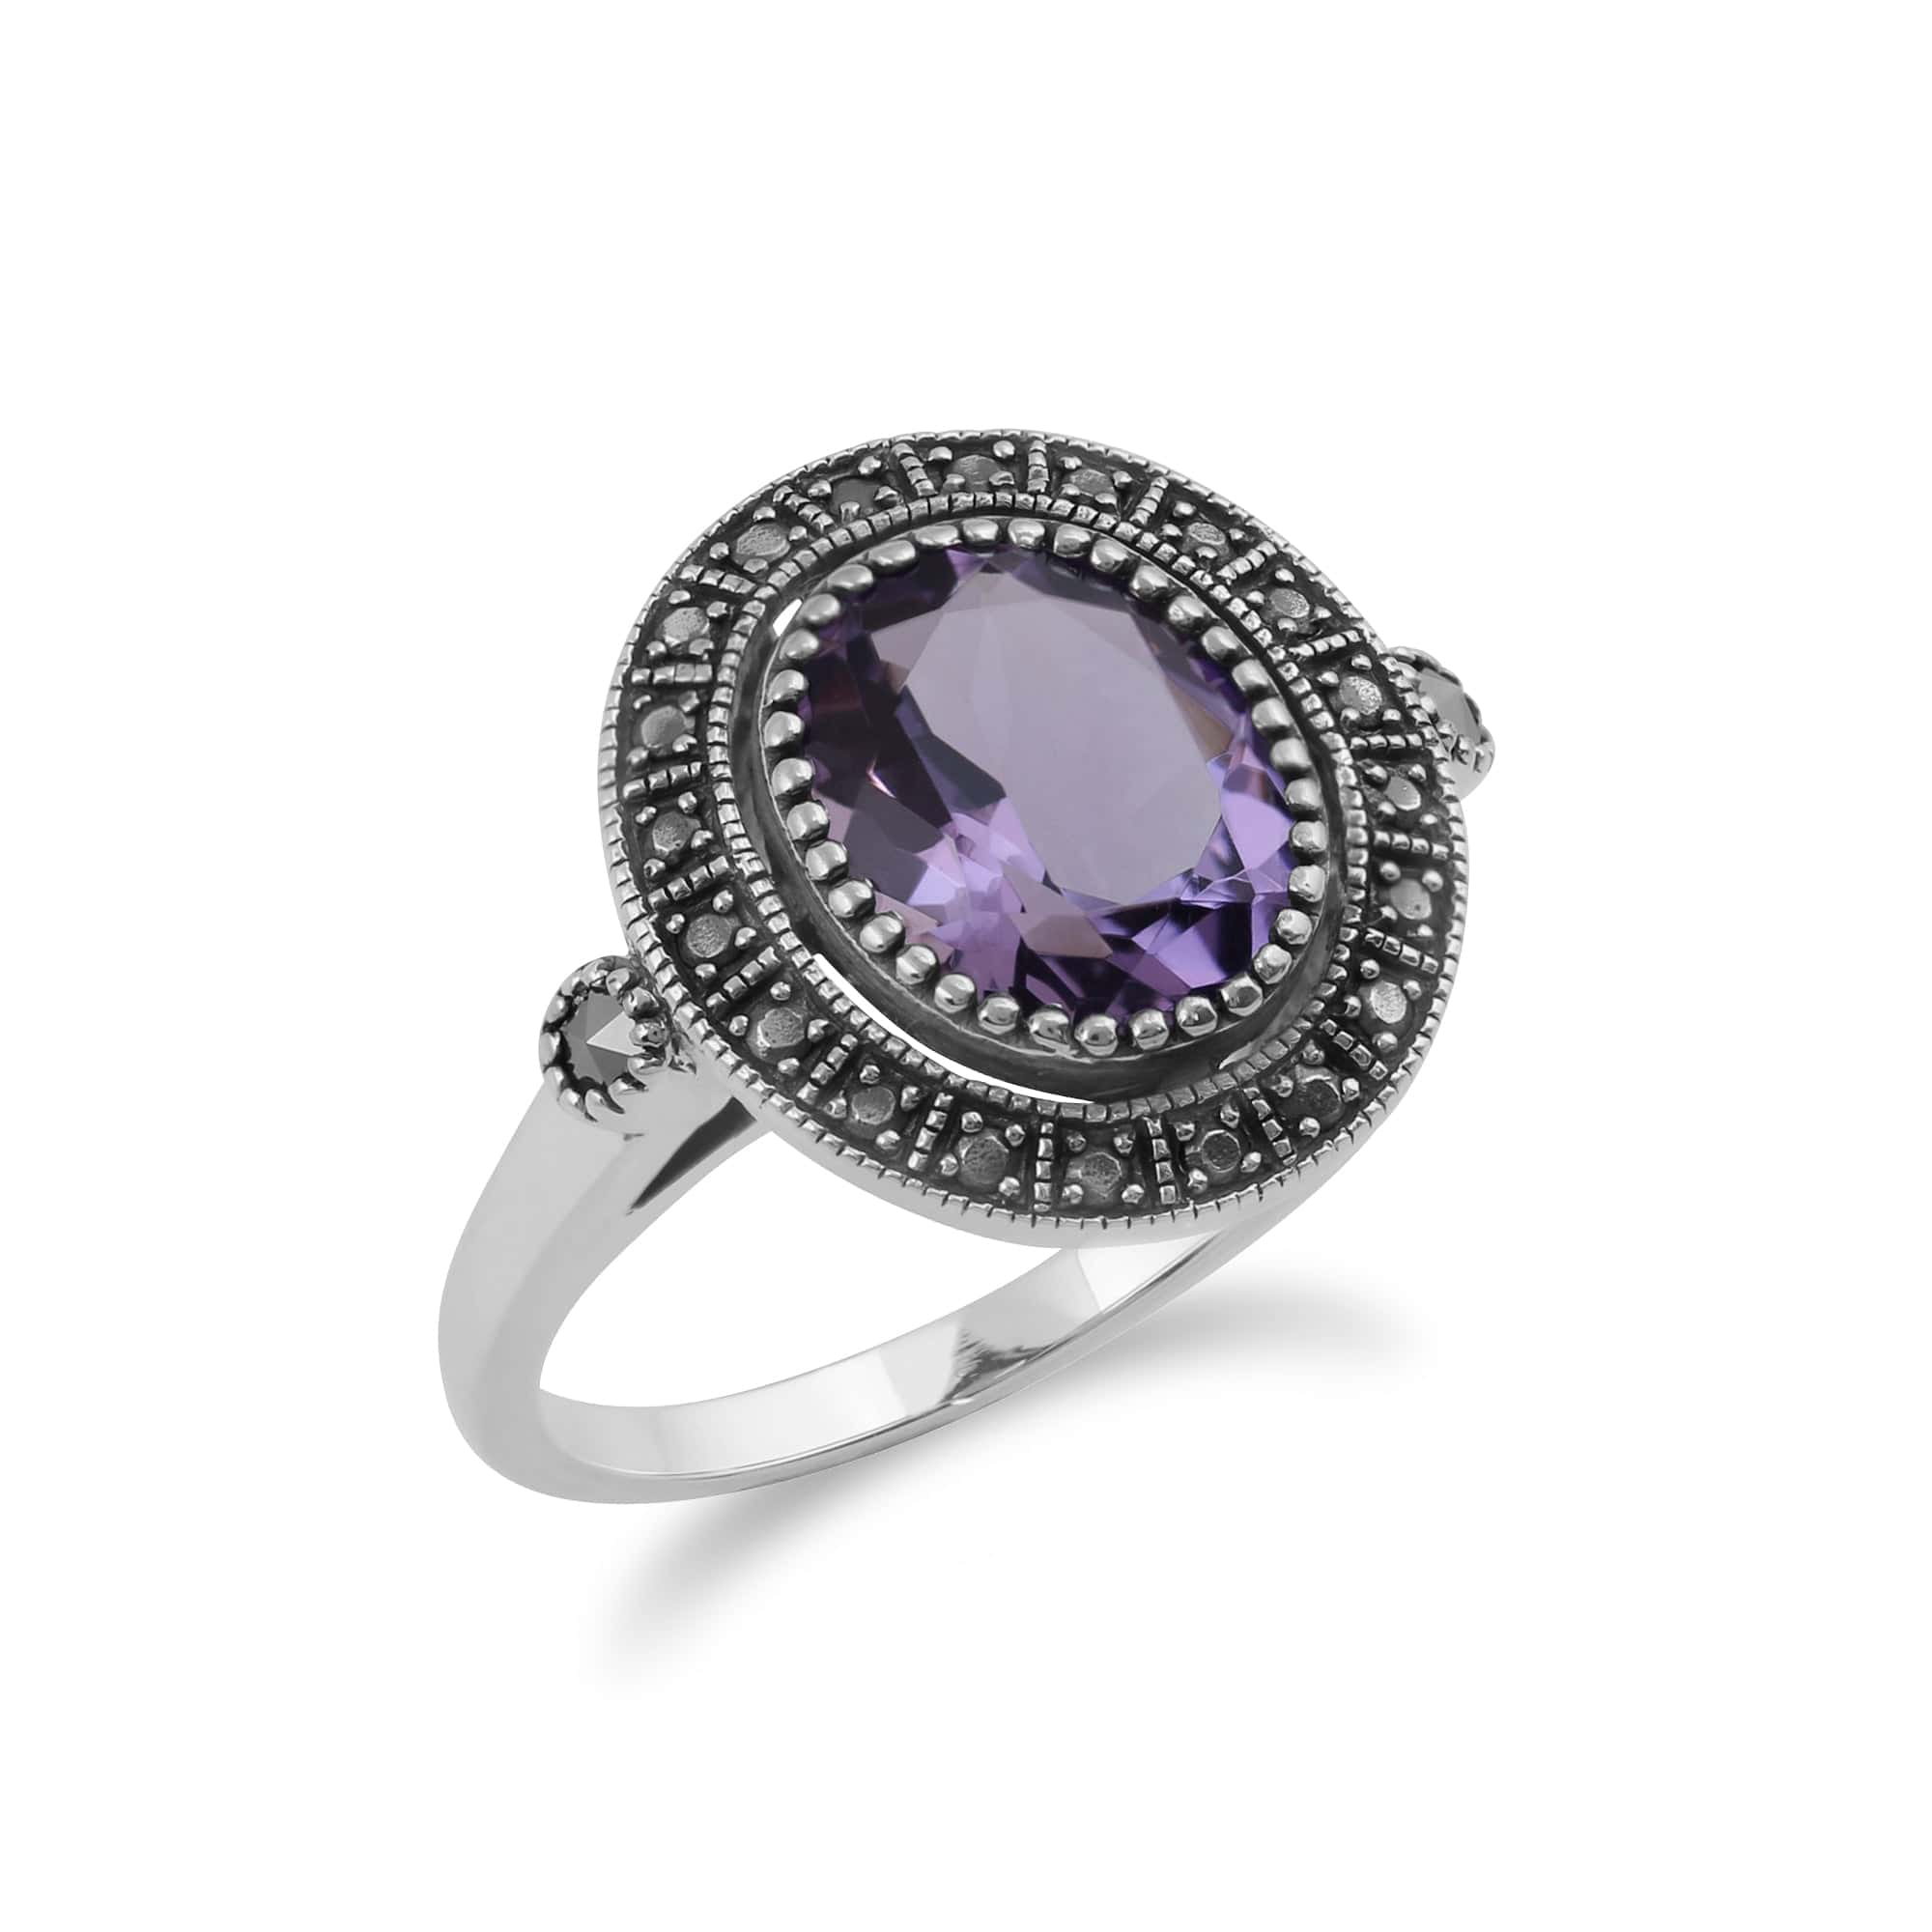 Art Deco Style Oval Amethyst & Marcasite Statement Cocktail Ring in 925 Sterling Silver - Gemondo